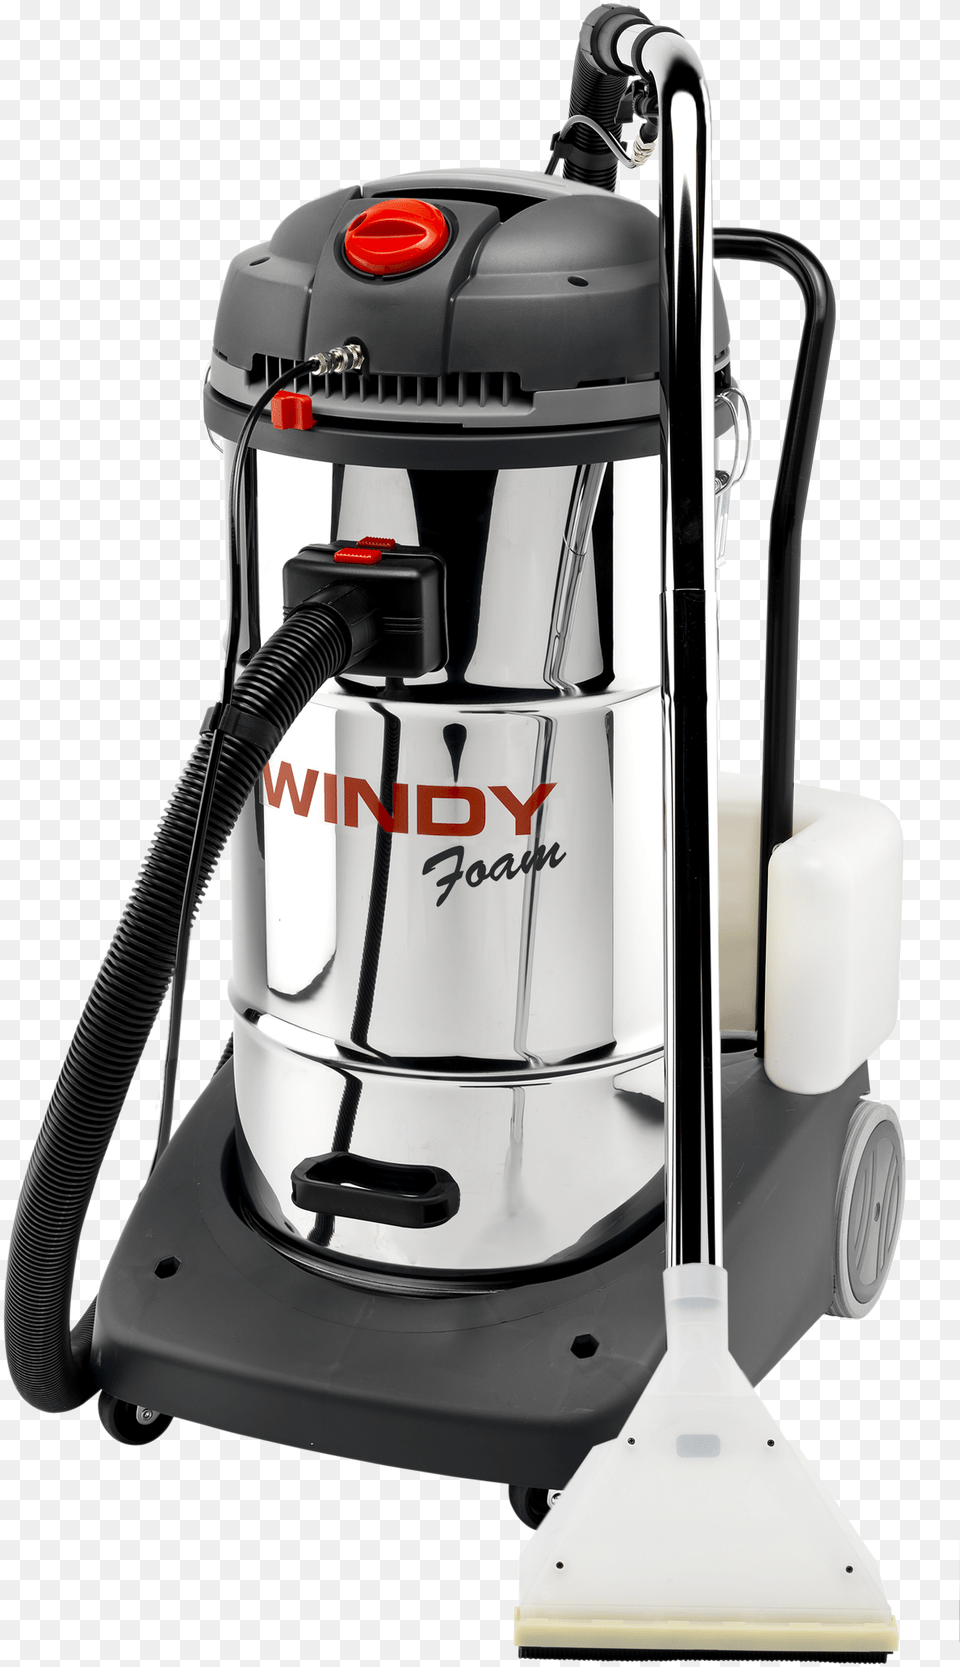 Windy Foam, Appliance, Device, Electrical Device, Vacuum Cleaner Png